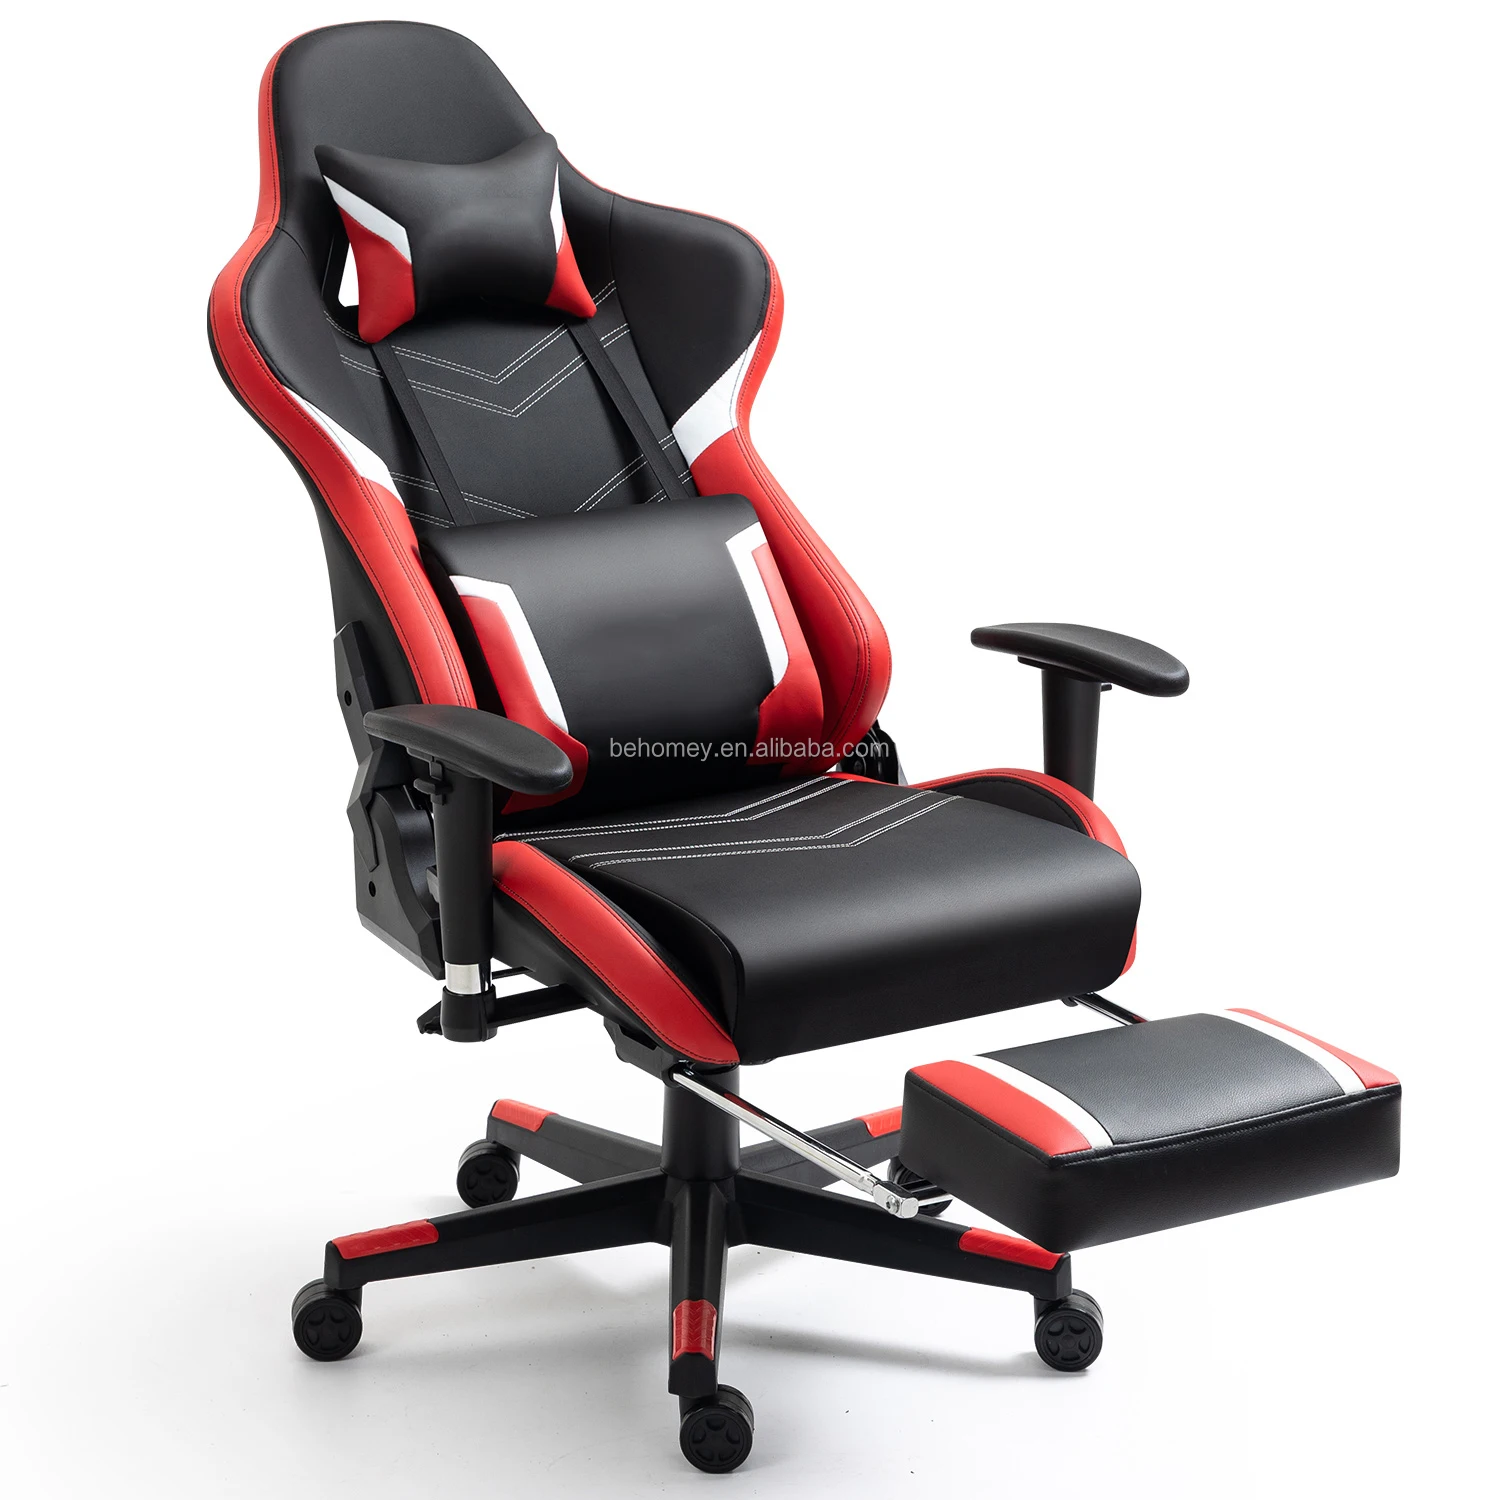 

cheapest Price Custom Deals PU Leather Black and Red Office Gamer Gaming Chair for Computer PC Game